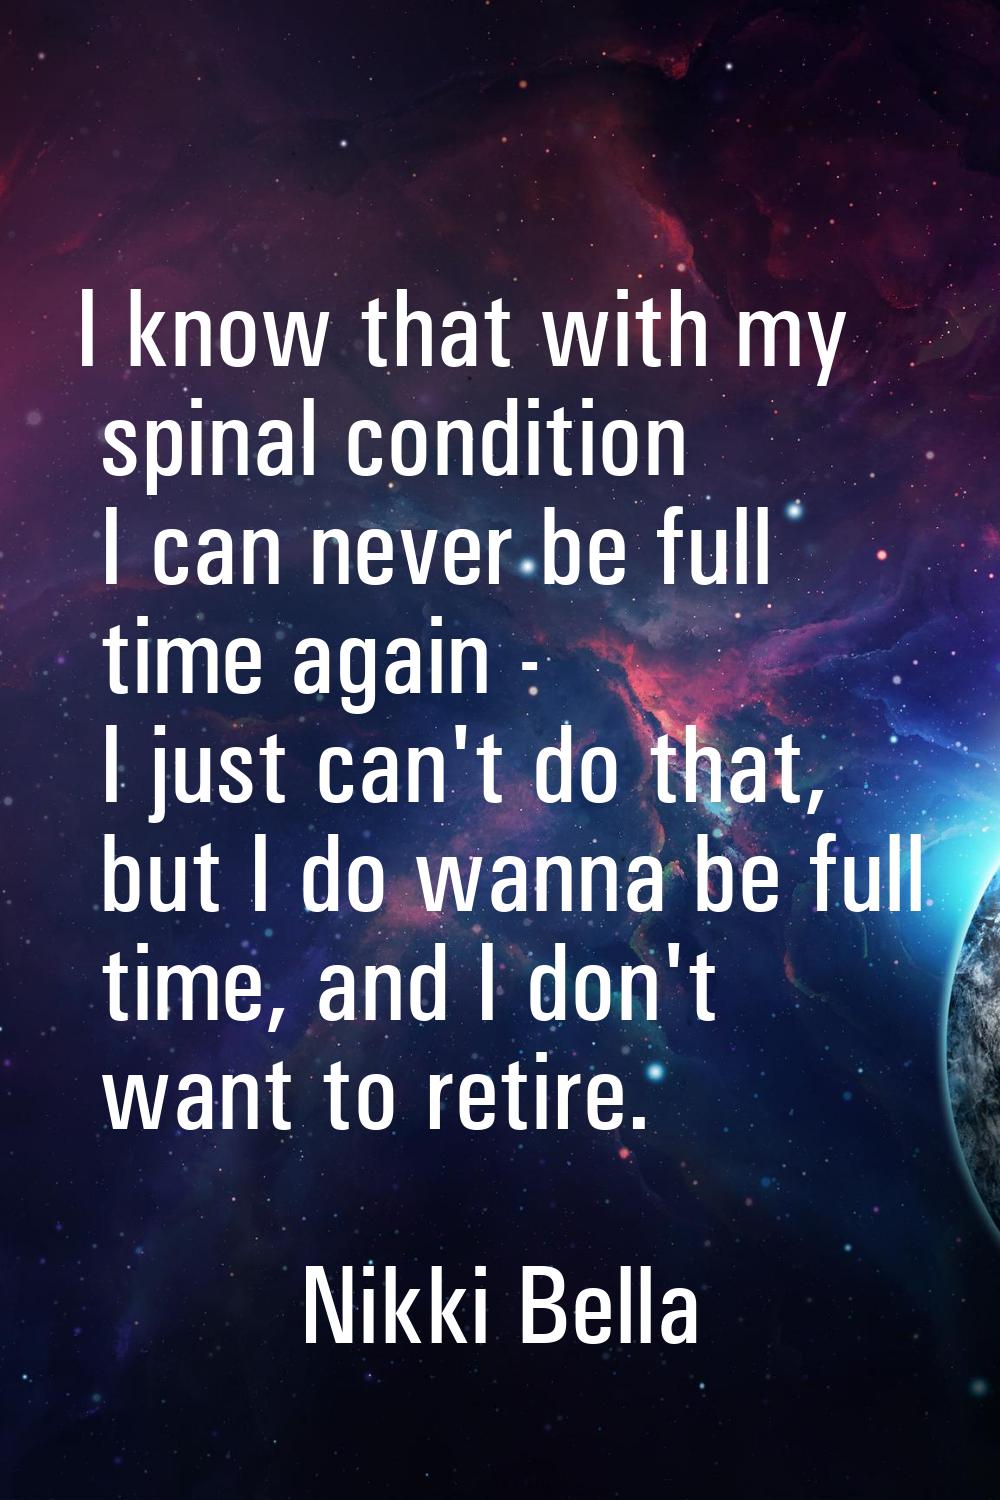 I know that with my spinal condition I can never be full time again - I just can't do that, but I d